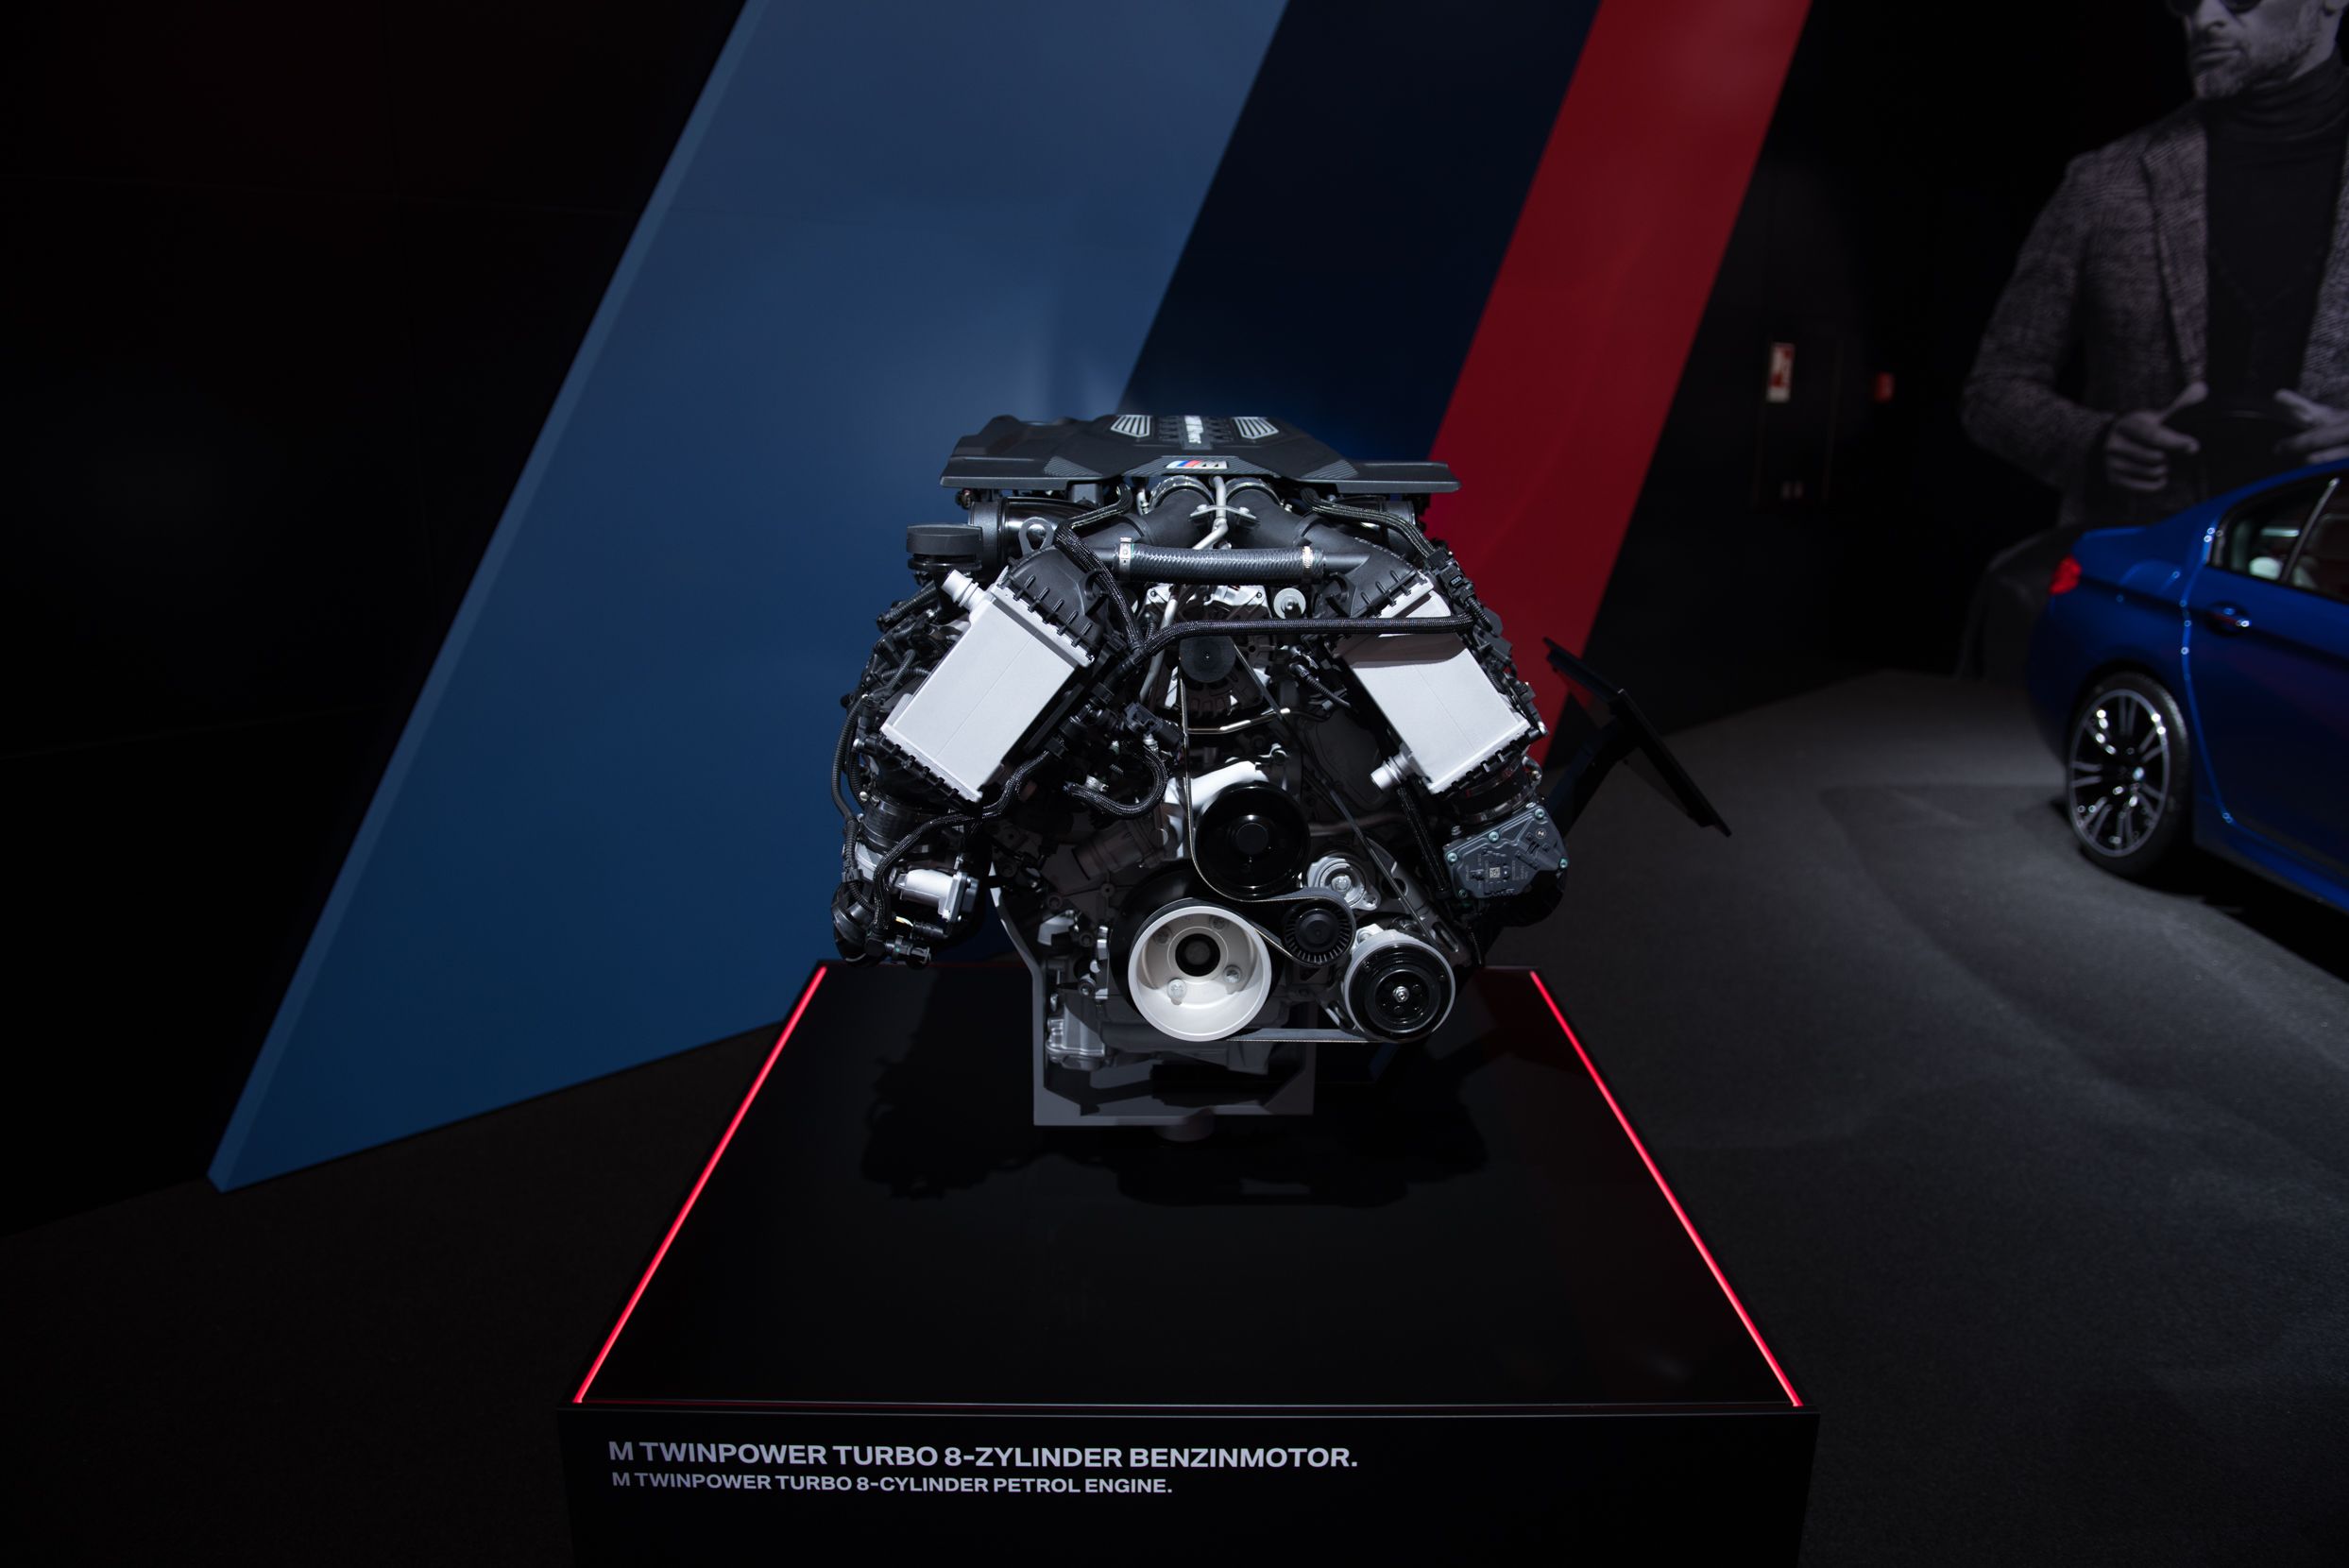 2020 BMW Could Be One of the Last Manufacturers to Drop the Internal Combustion Engine